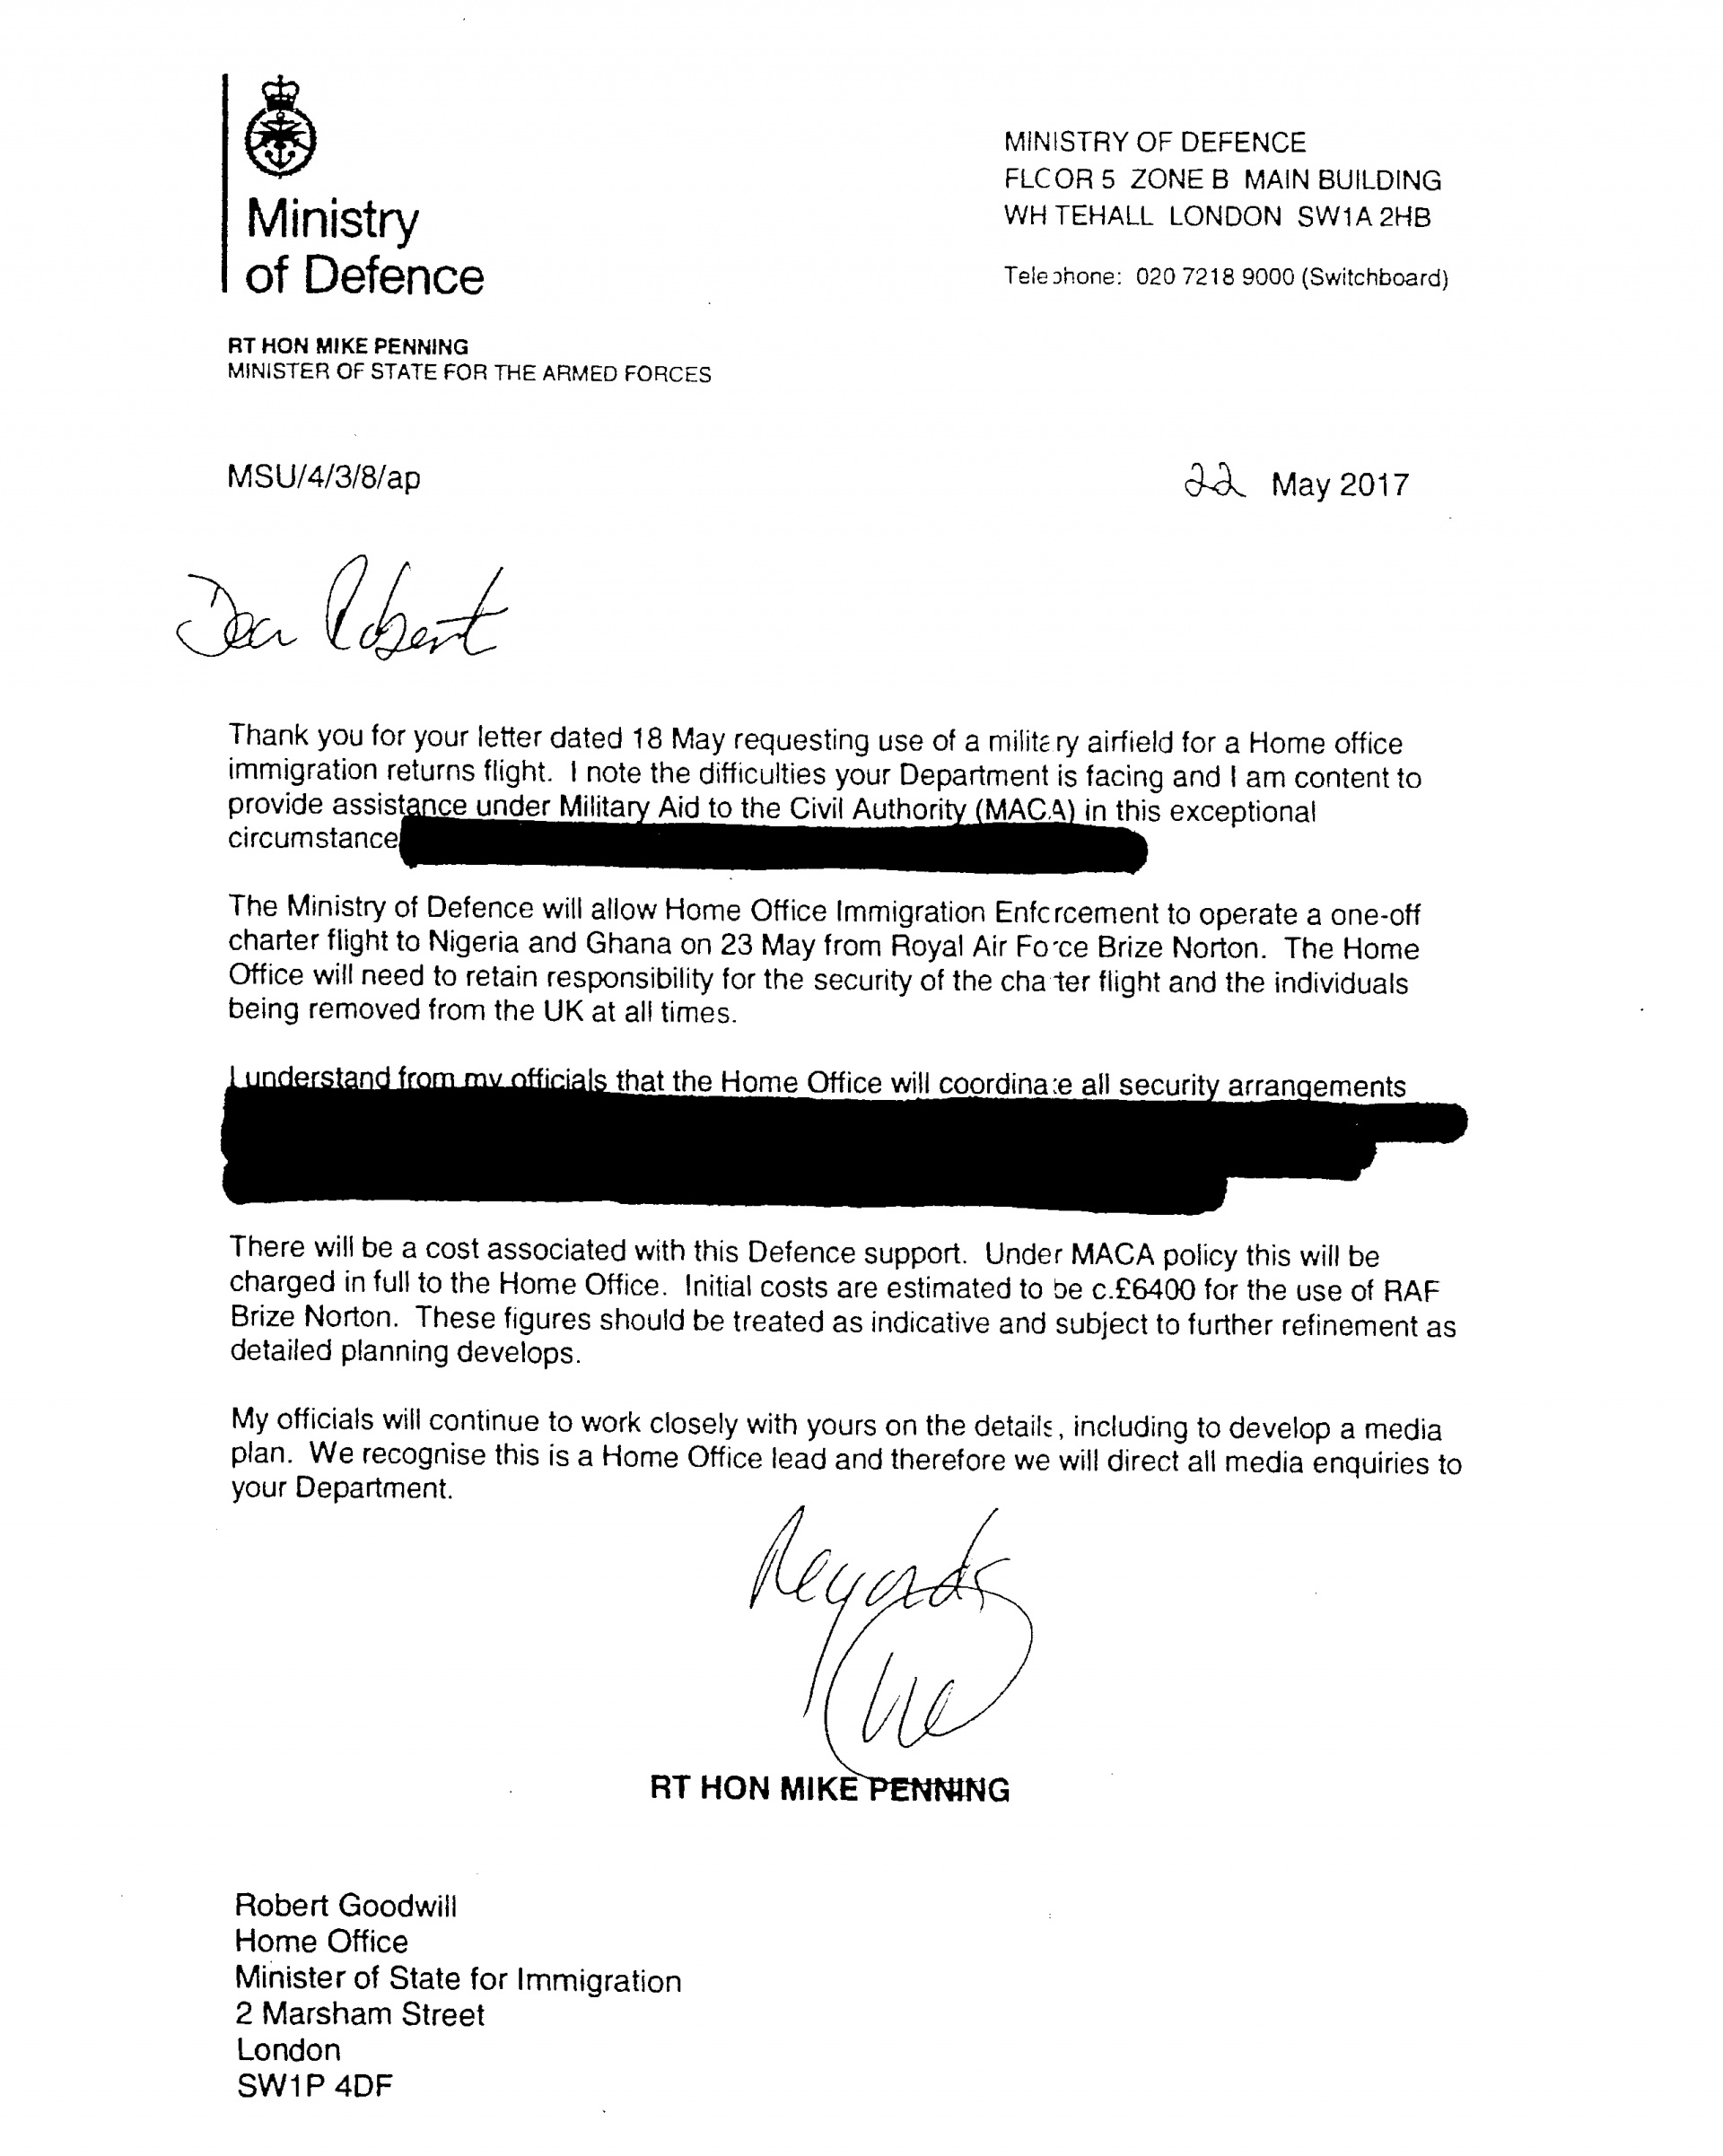 Then Tory defence minister Mike Penning's letter to then immigration minister Robert Goodwill